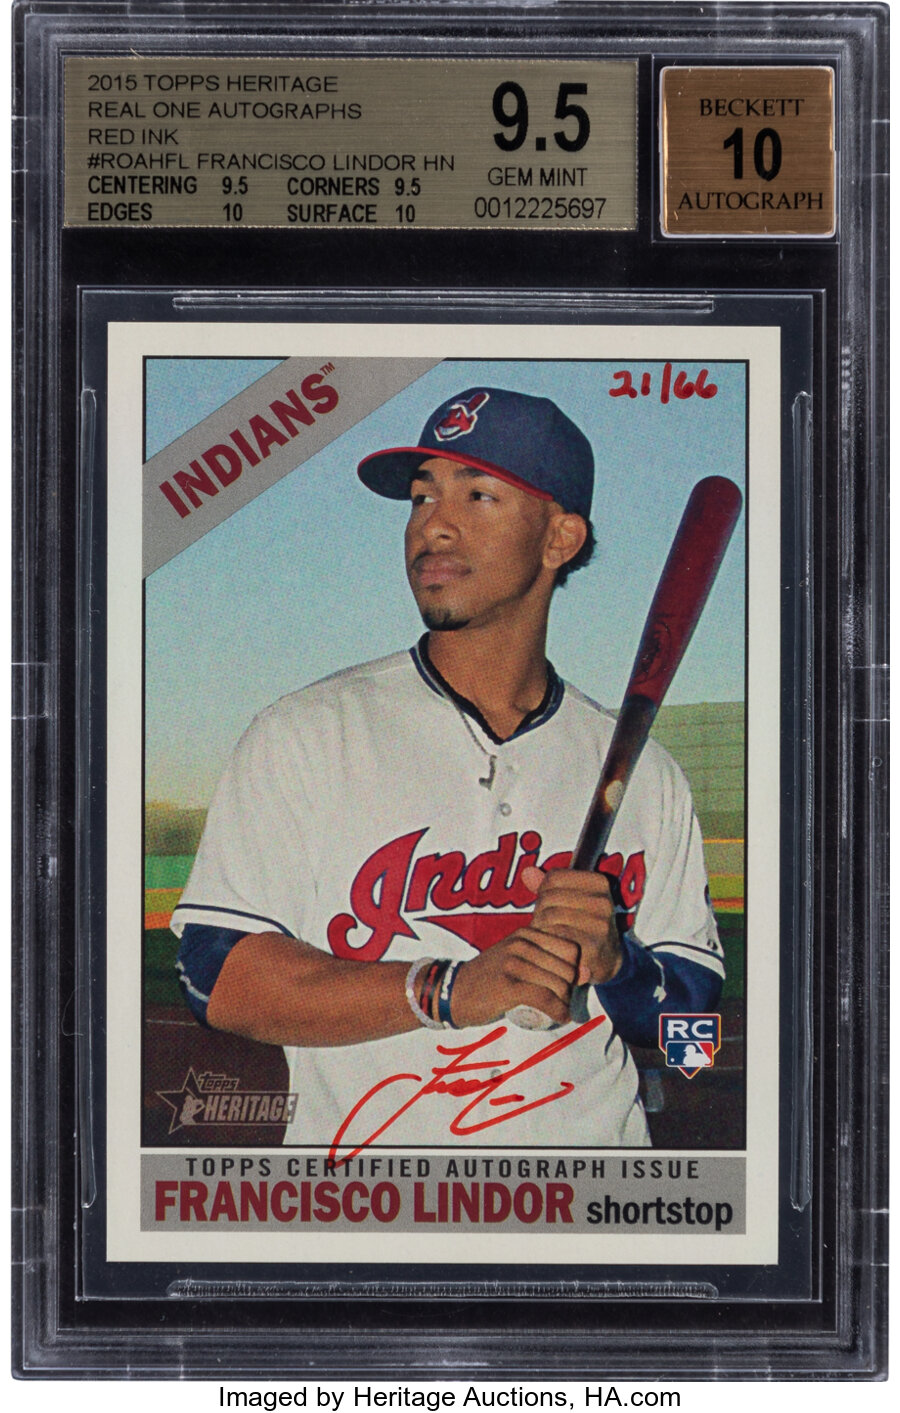 2015 Topps Heritage Real One Autographs Francisco Lindor (Red Ink) #FL BGS Gem Mint 9.5 - Auto 10 - #'s 21/66